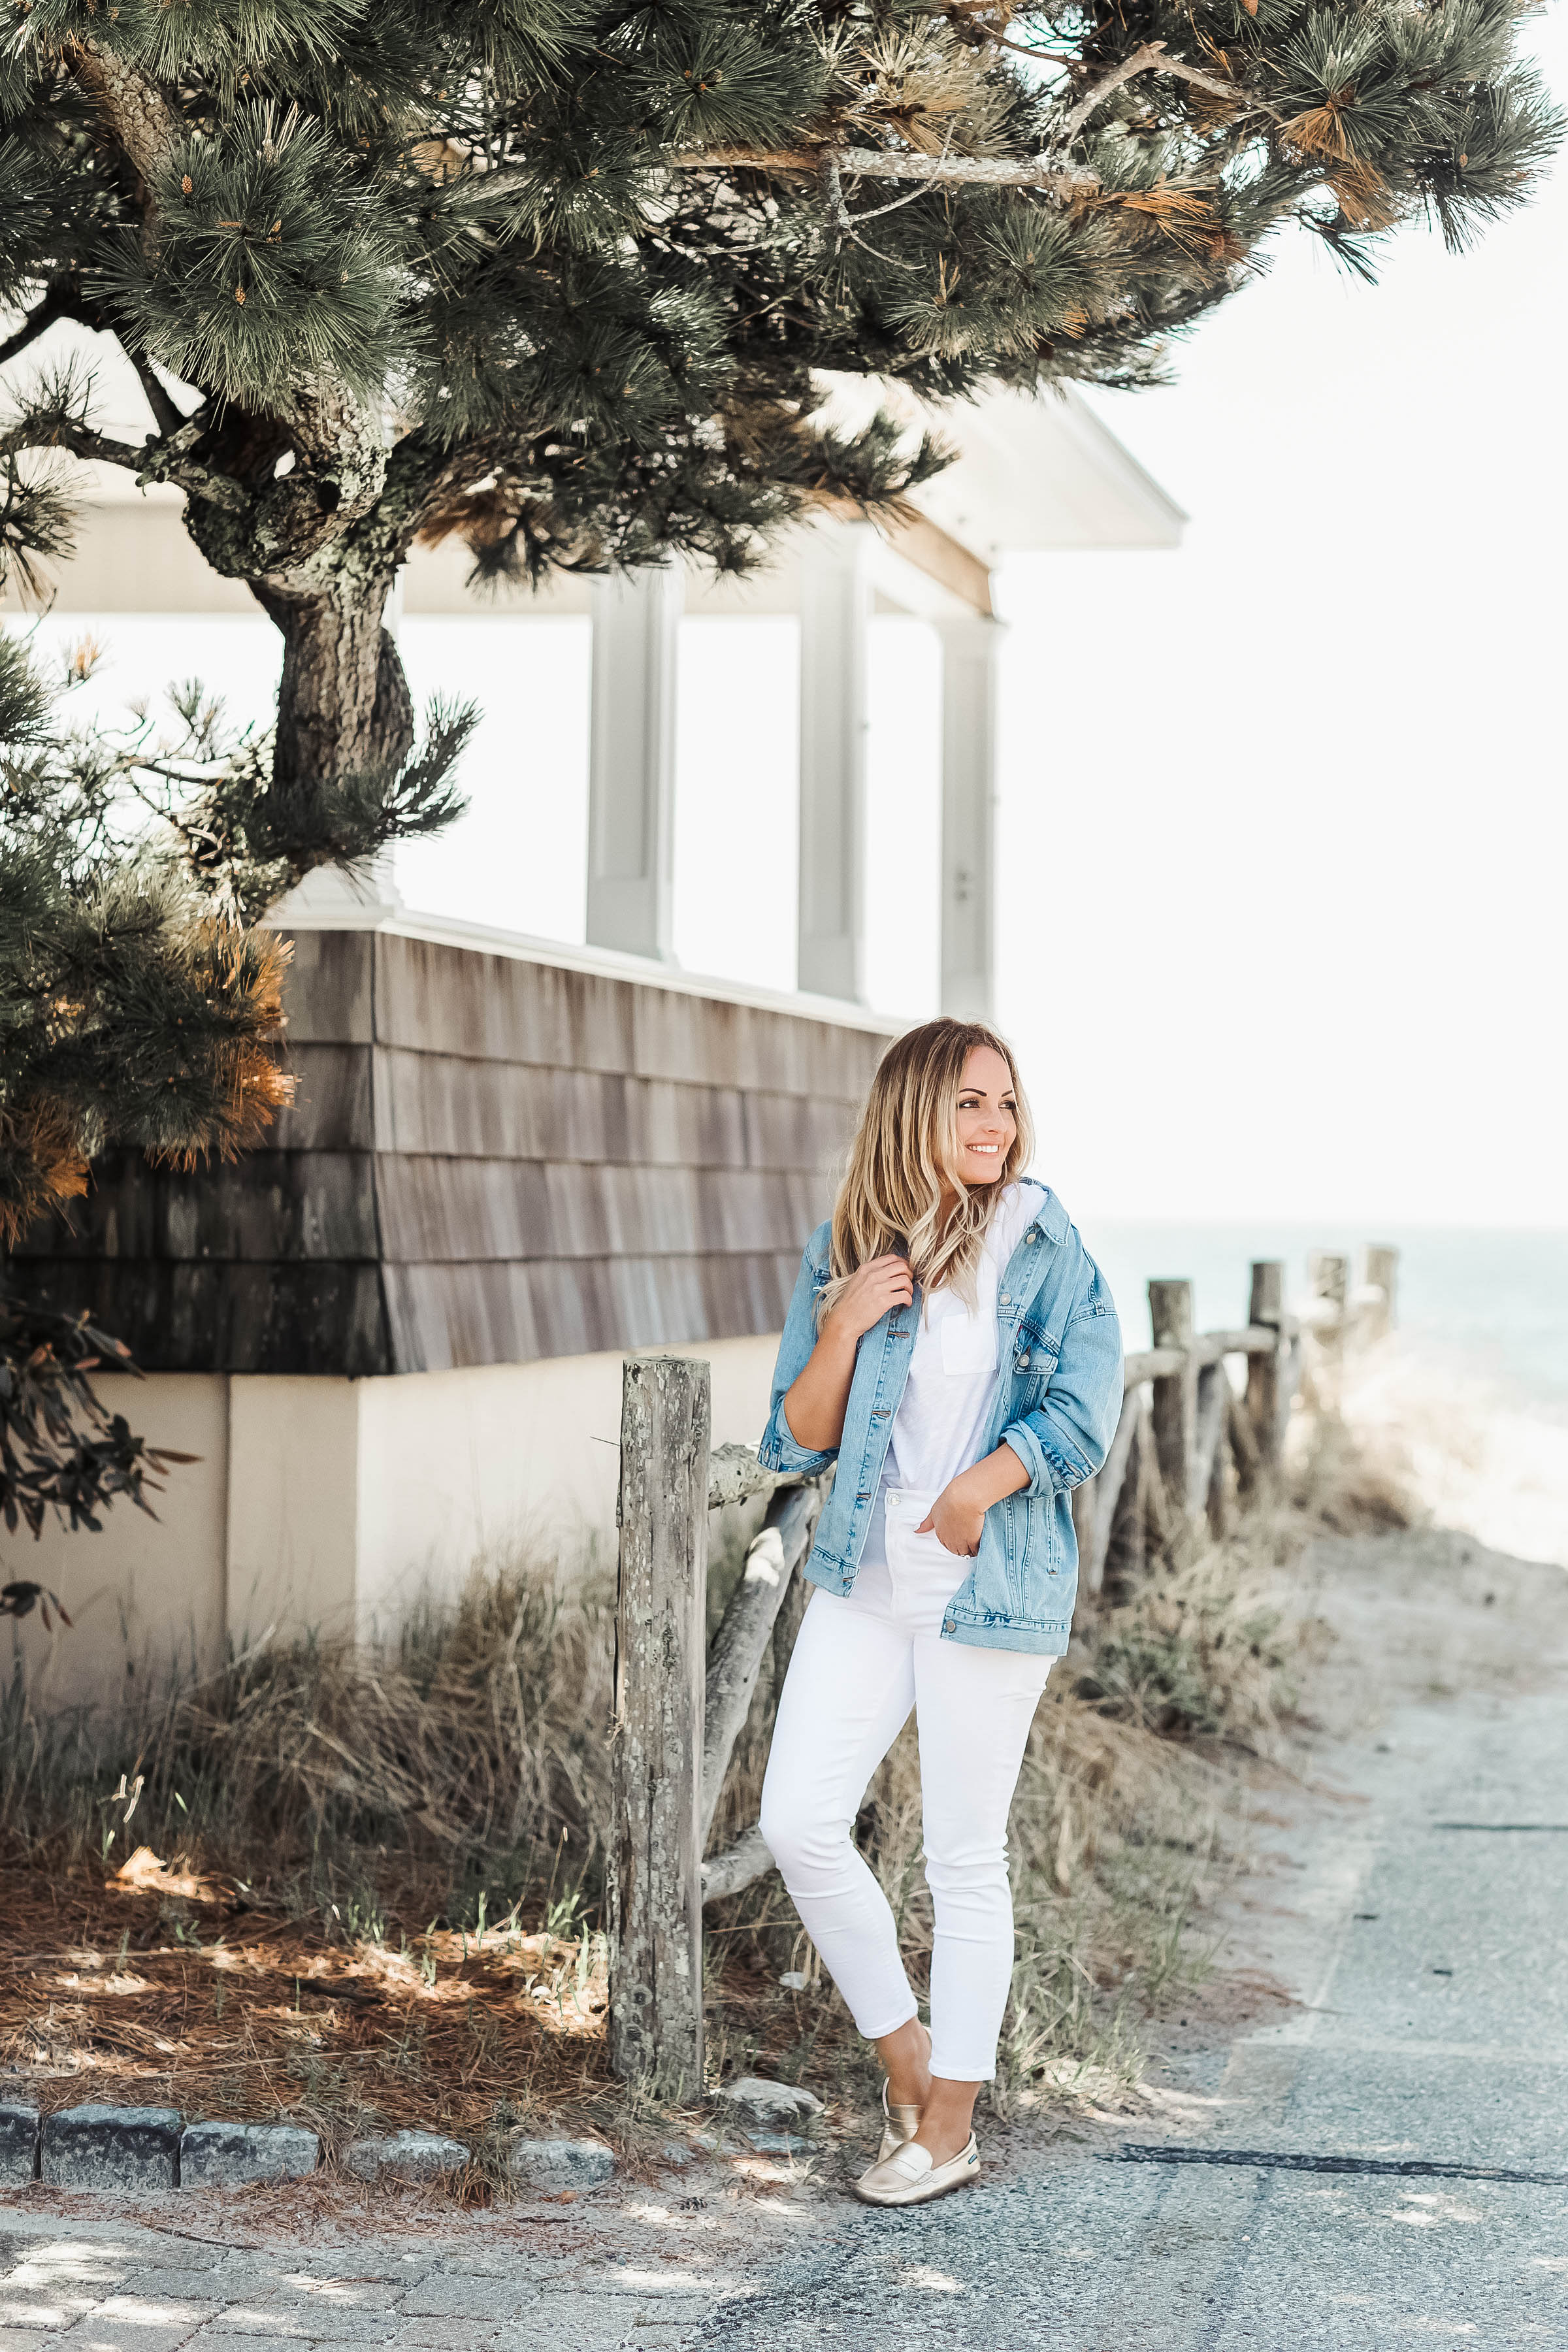 How To Style White Jeans For Summer